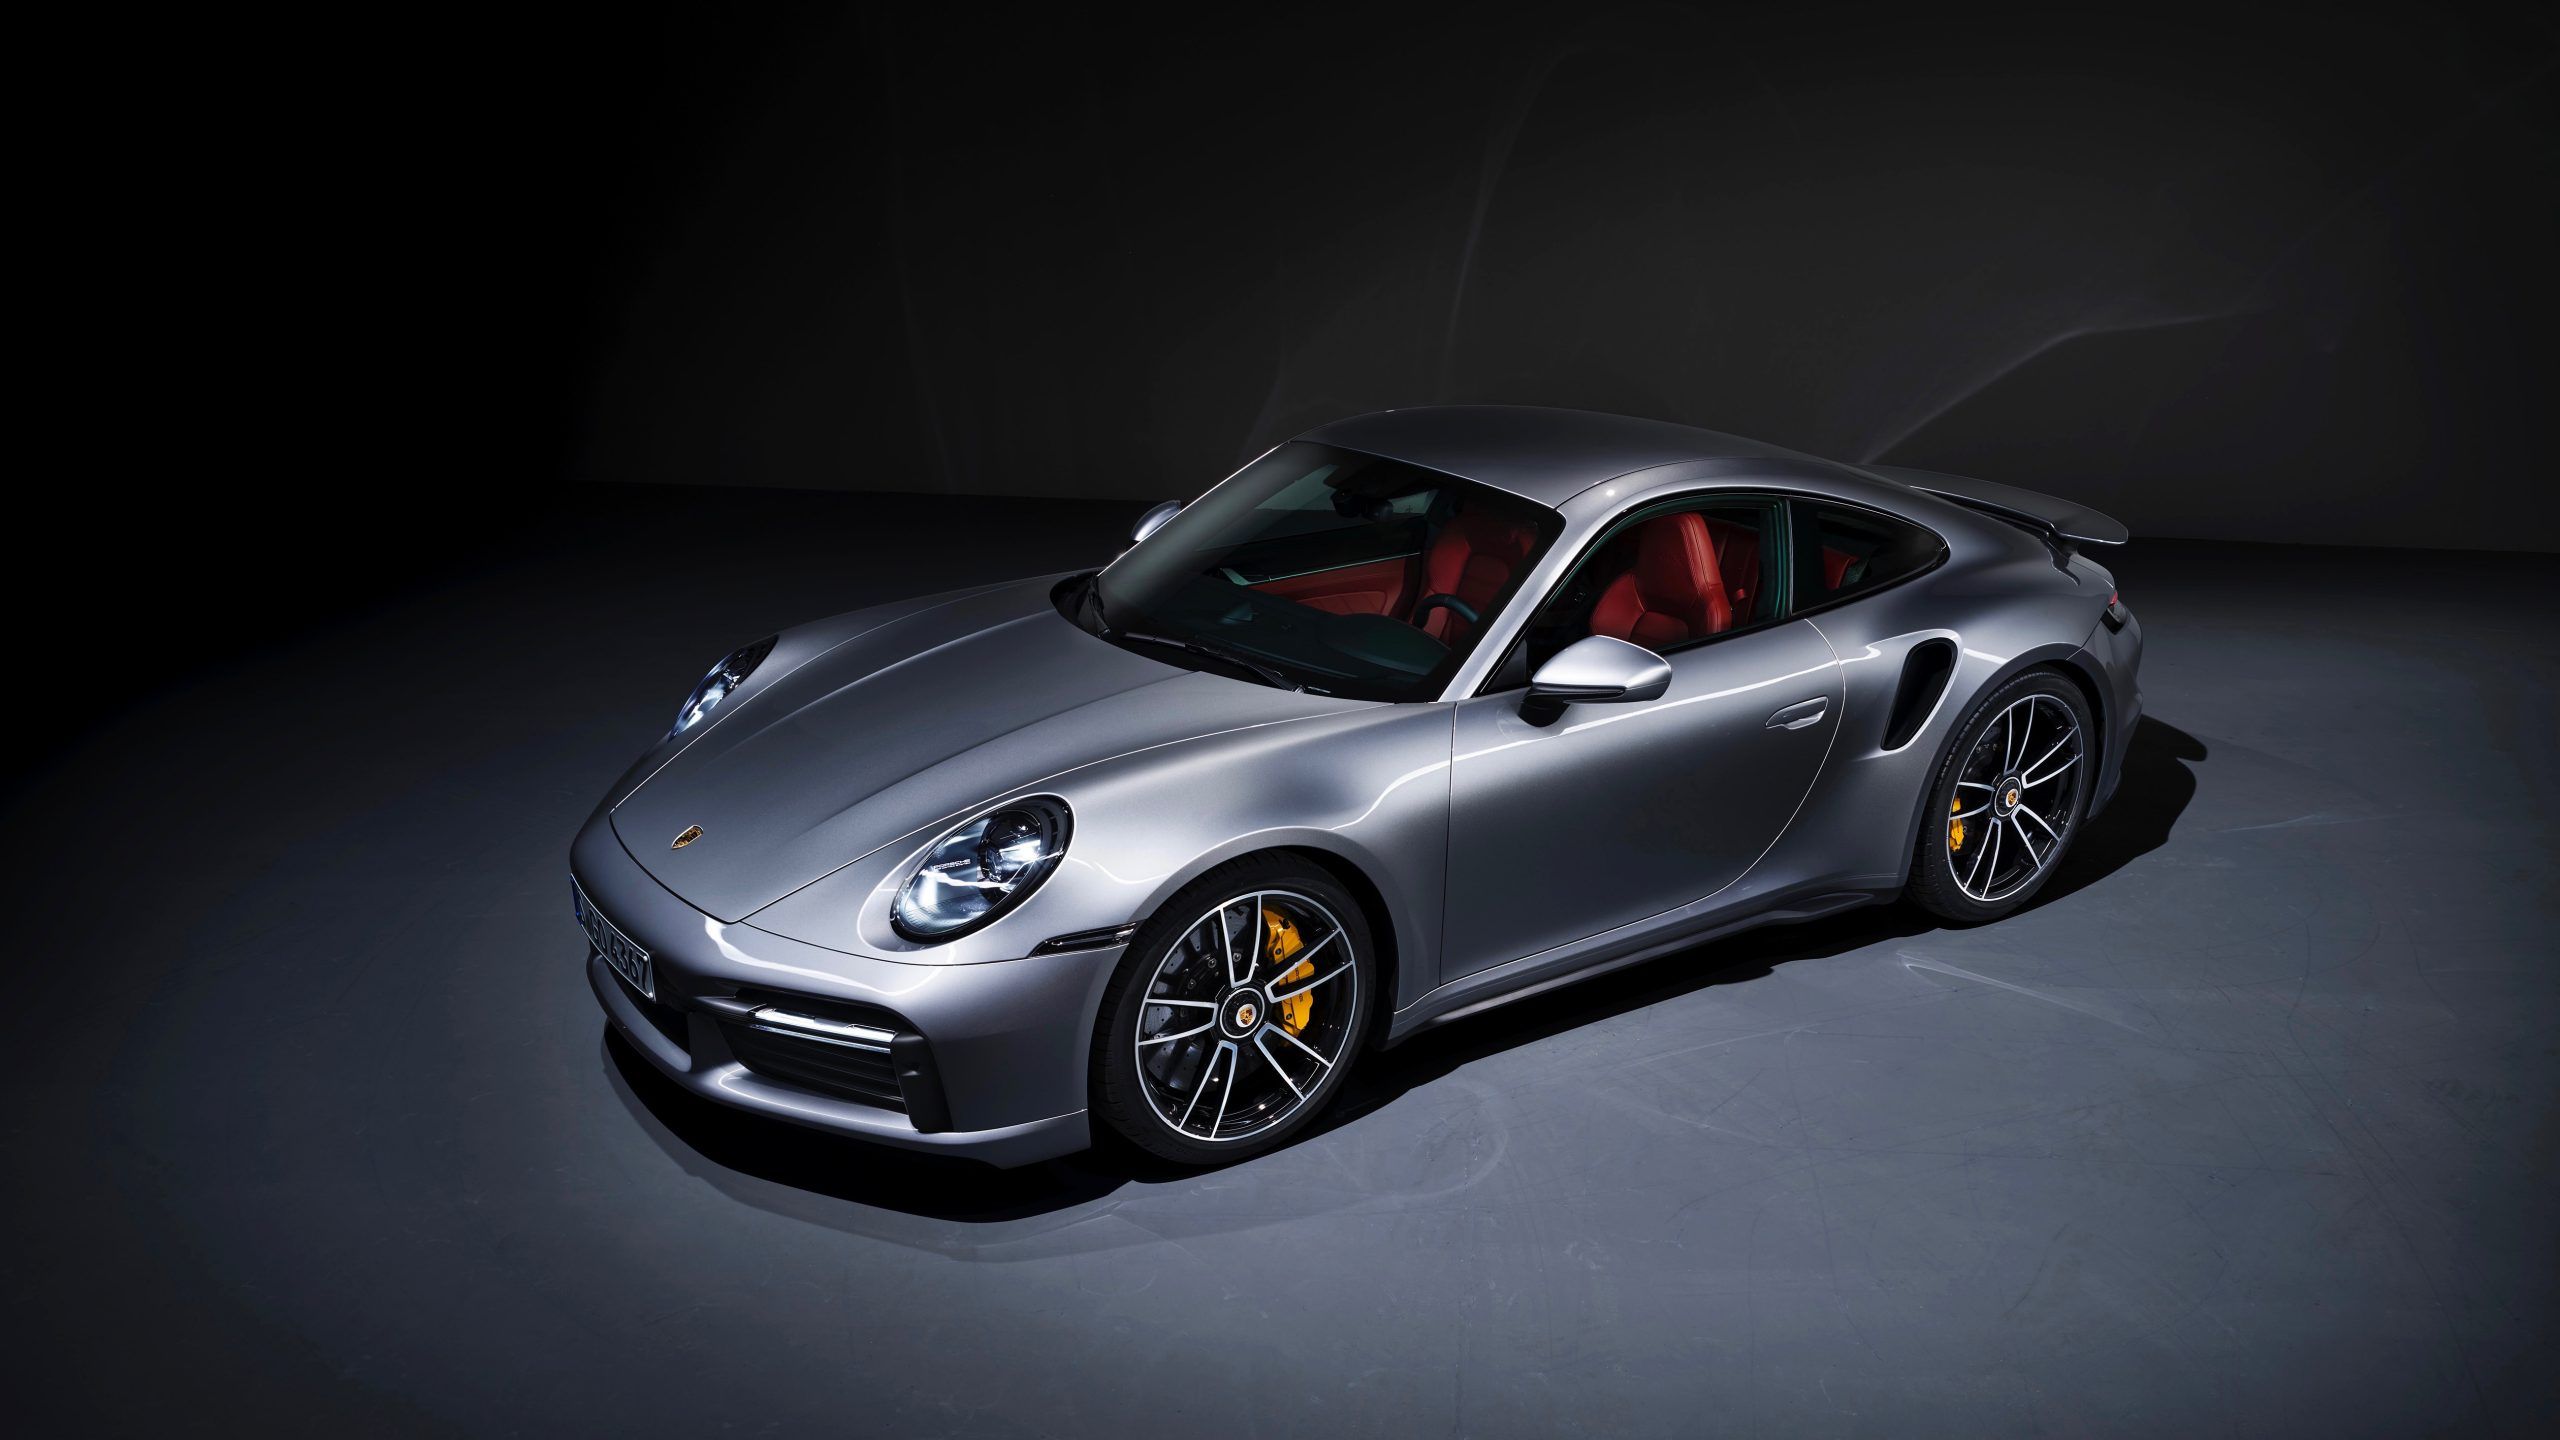 Porsche 911 Turbo S revealed, now with 641 HP